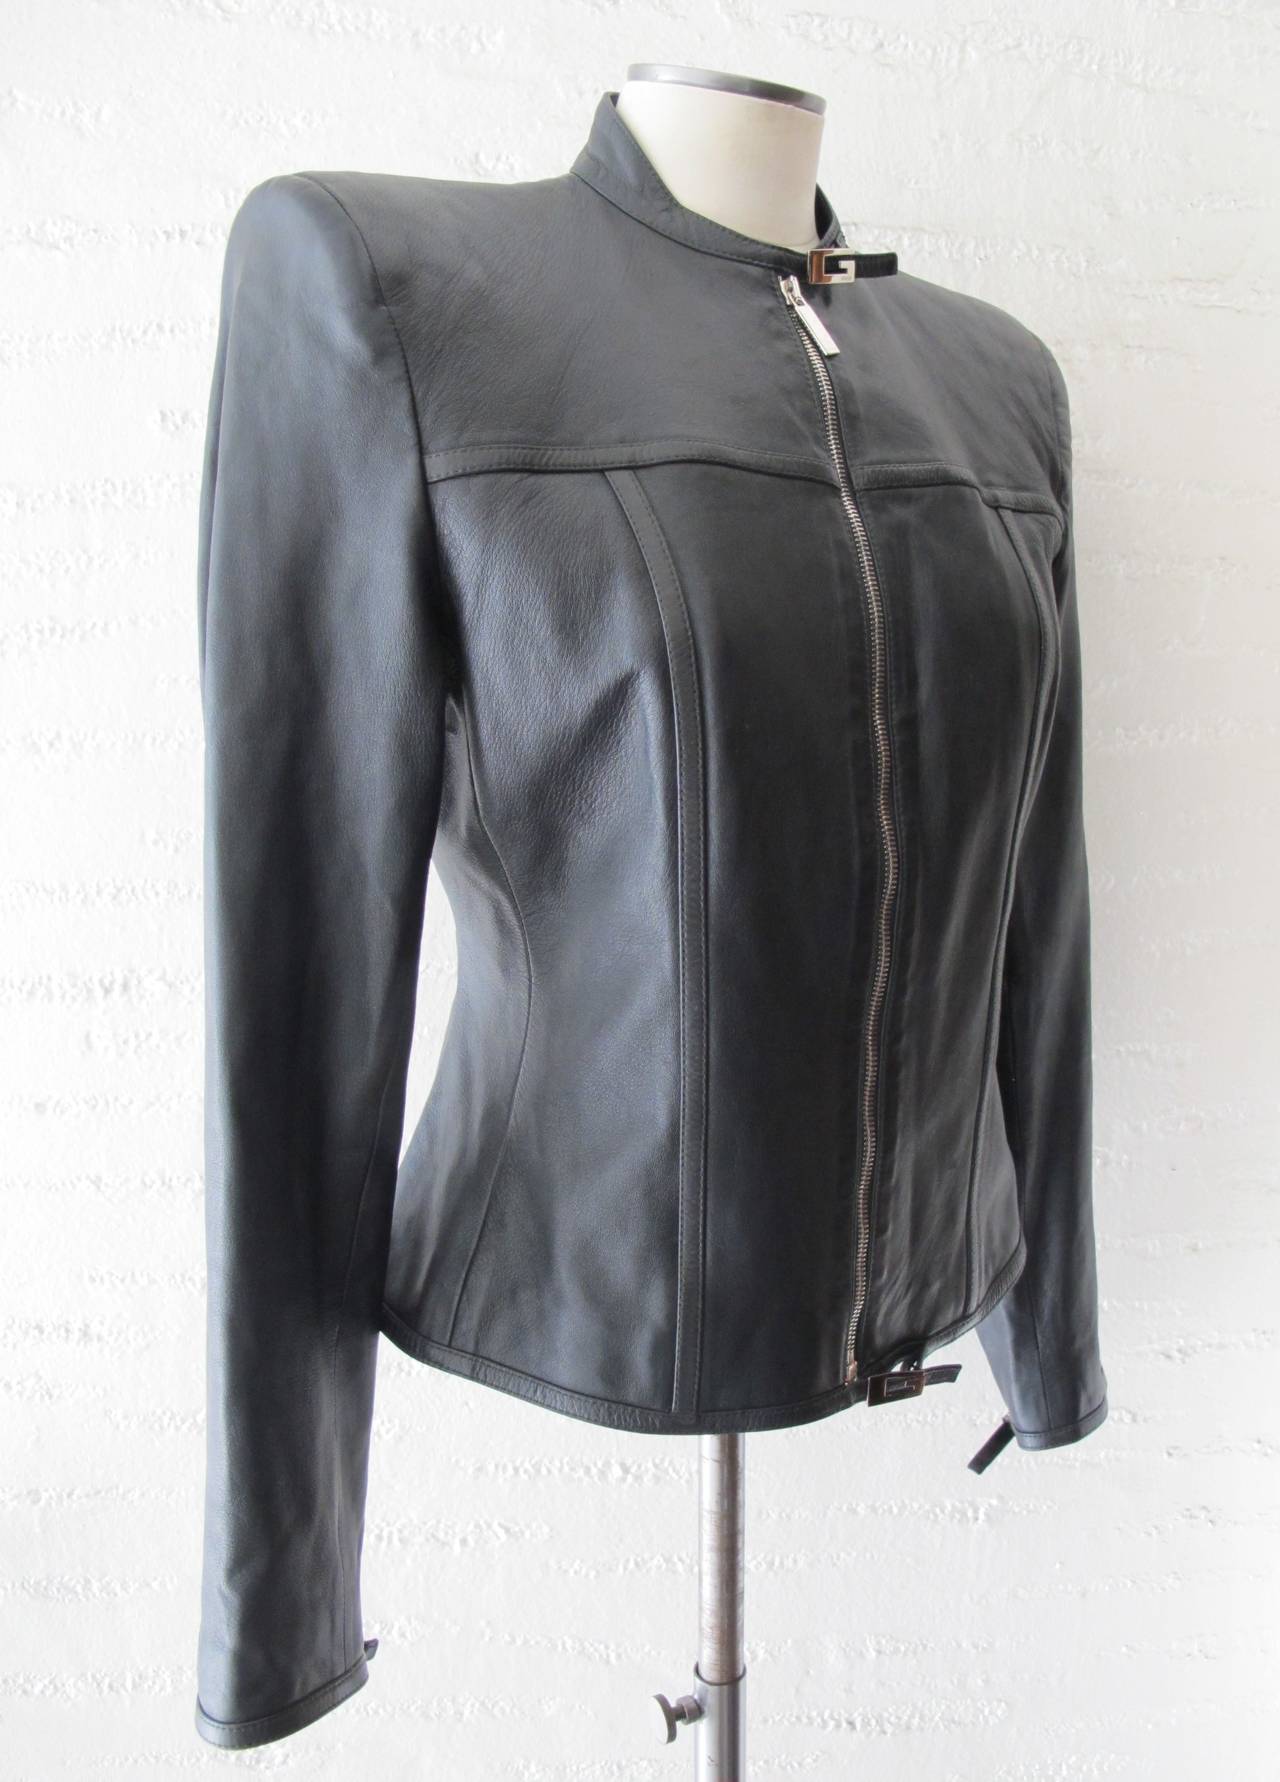 Fabulous black leather Gucci jacket designed by Tom Ford. There are 4 silver buckles with Gucci name inscribed on the silver chrome buckles which can be seen on the neck, bottom of jacket and one on each sleeve. They serve as closures. Sleeve length